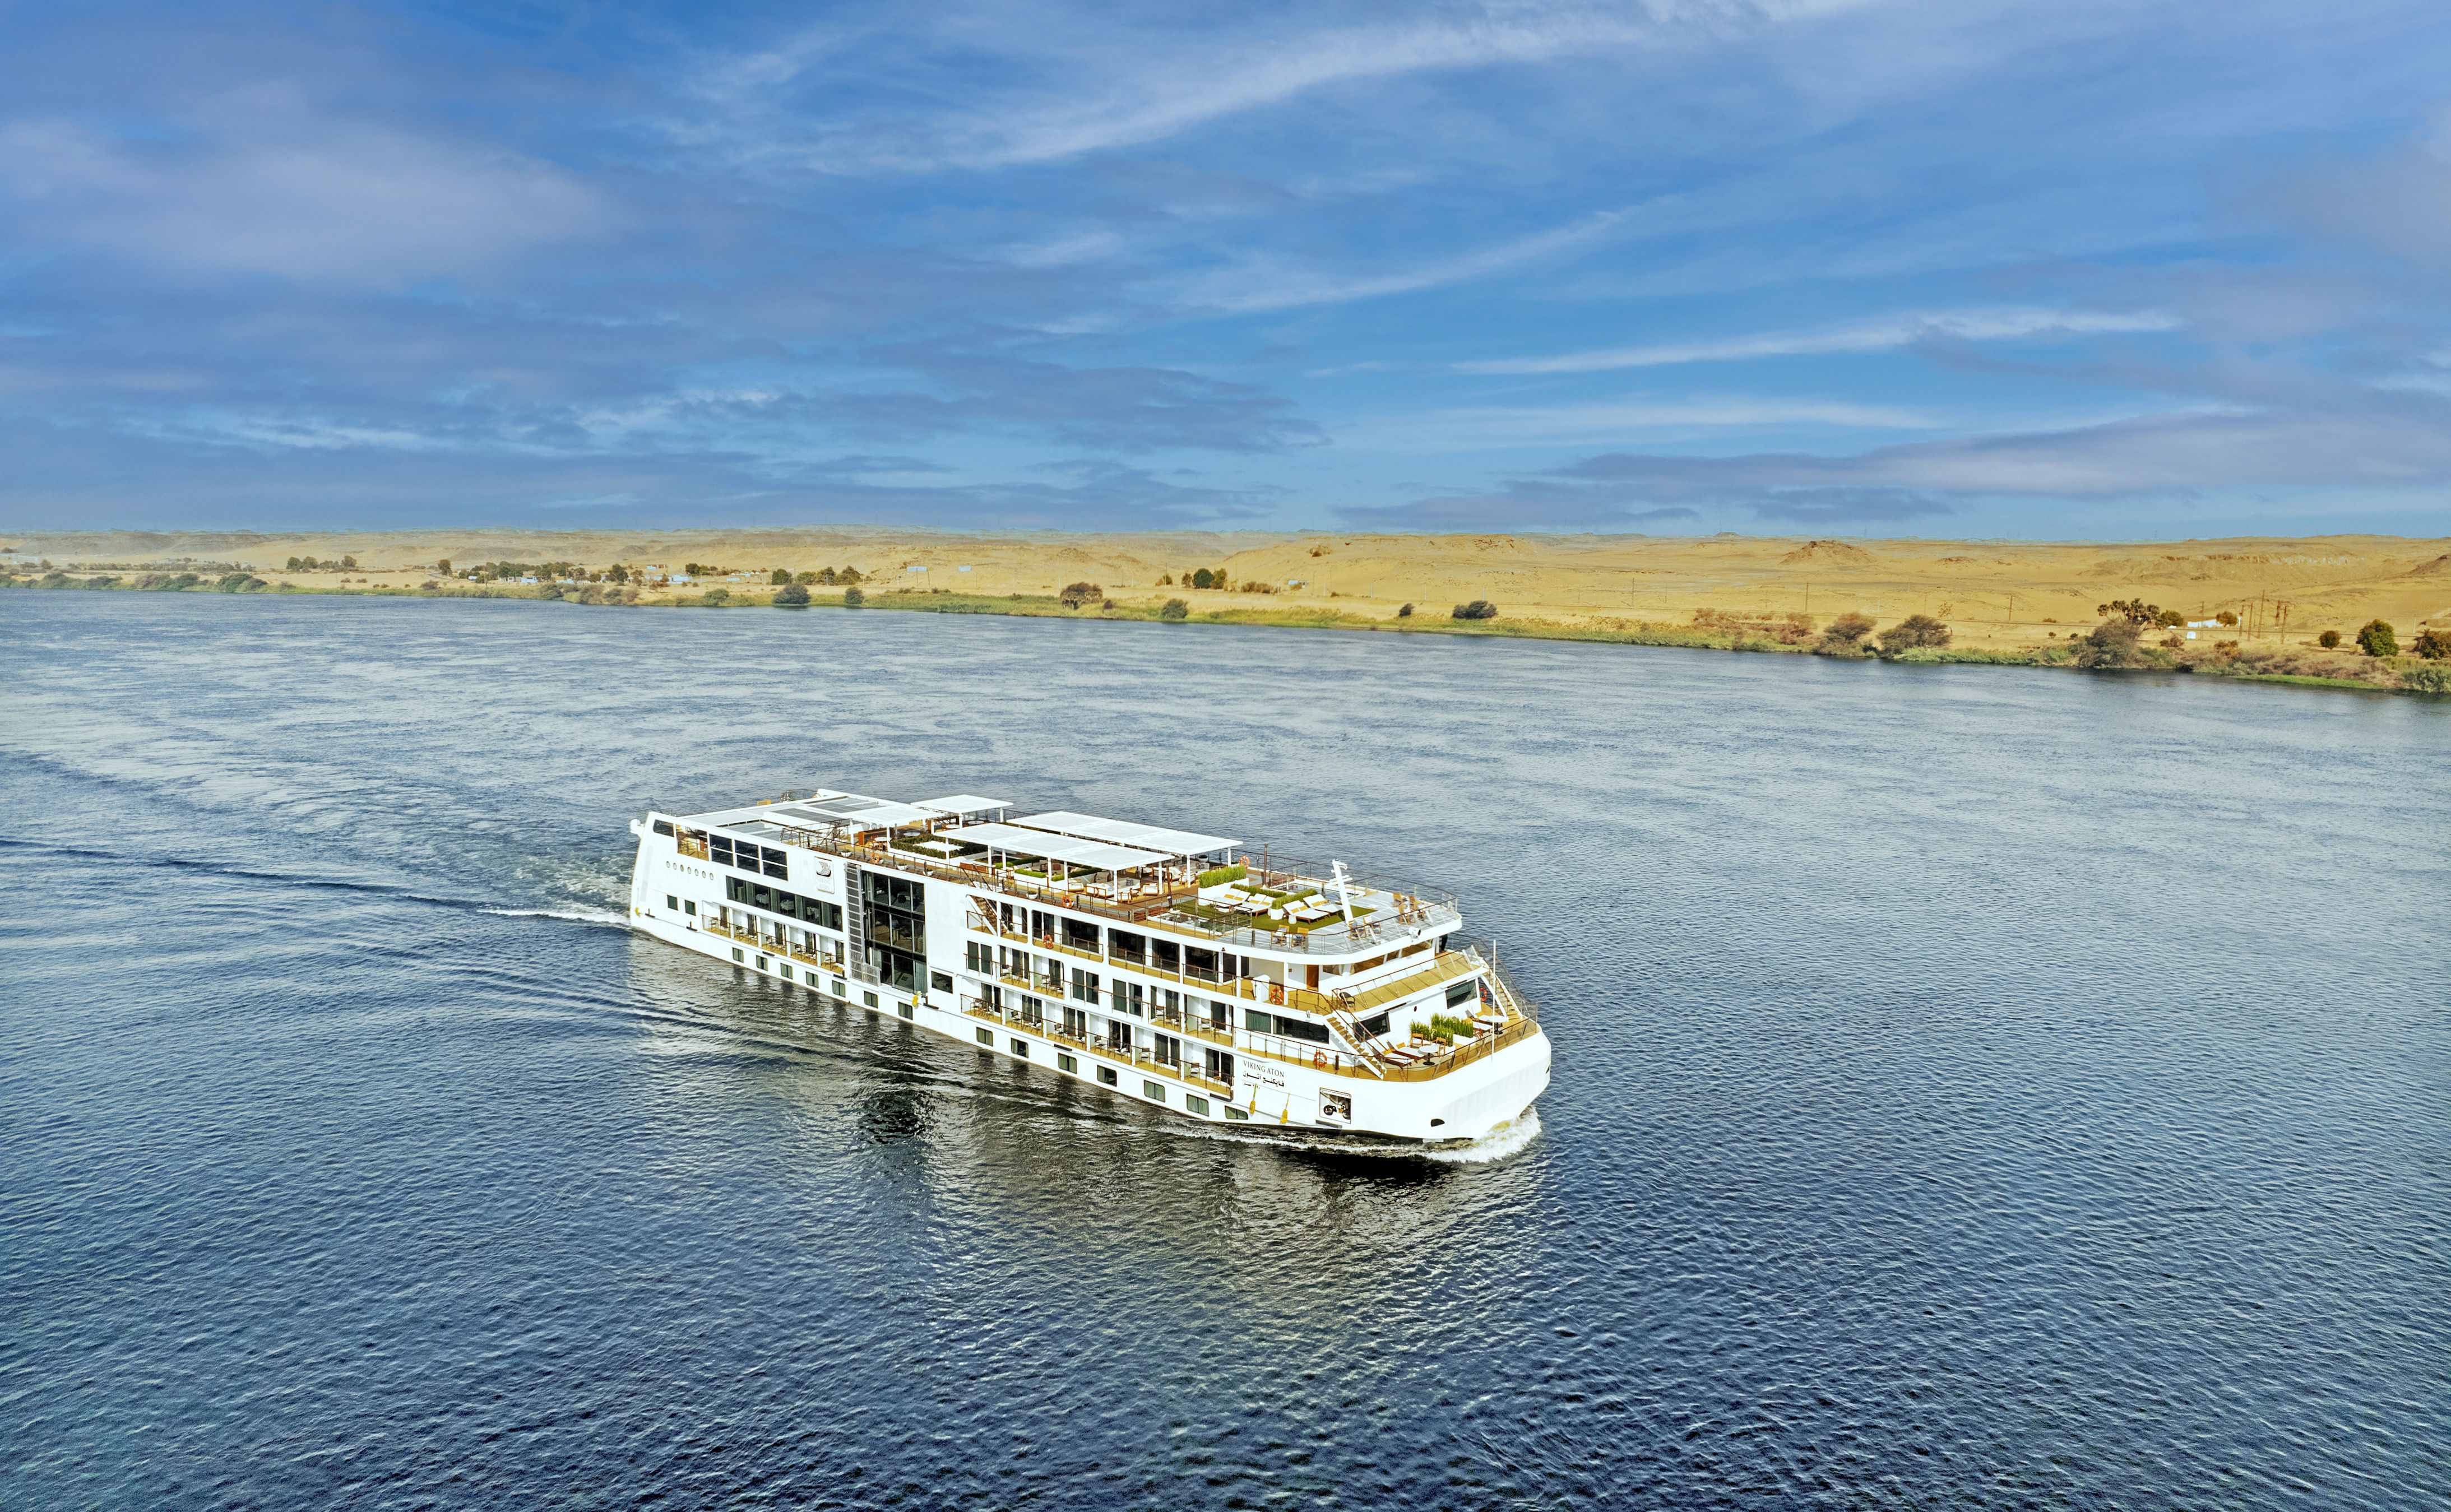 <p>On this adults-only cruise line, choose between <a href="https://www.cntraveler.com/story/guide-to-european-river-cruises?mbid=synd_msn_rss&utm_source=msn&utm_medium=syndication">river</a>, ocean, and expedition vessels. Viking ships sail all seven continents. <a href="https://www.cntraveler.com/ships/viking-cruises/viking-octantis?mbid=synd_msn_rss&utm_source=msn&utm_medium=syndication"><em>Viking Octantis</em></a> and <em>Viking Polaris</em> explore the poles but also sail Niagara, the Great Lakes, and Chilean fjords. While categorized as upper premium, Viking’s ocean and expedition fleet includes many amenities, such as one shore excursion per port, all dining, afternoon tea, beer and wine with lunch and dinner, spa Thermal Suite access, WiFi, and 24-hour room service.</p> <p><strong>The sailing to take this year:</strong> Since <a href="https://www.cntraveler.com/sponsored/story/experience-the-most-extraordinary-voyages-in-the-world-with-viking?mbid=synd_msn_rss&utm_source=msn&utm_medium=syndication">Viking</a> is Norwegian, start with a “Viking Homelands” cruise. The 15-day voyages on various 930-passenger ocean-going sister ships sails between Stockholm and Bergen, Norway, and visits six countries including Poland, Denmark, and Germany. The packed itinerary includes sailing fjords and hiking remote Swedish islands, to touring <a href="https://www.cntraveler.com/destinations/berlin?mbid=synd_msn_rss&utm_source=msn&utm_medium=syndication">Berlin</a> and <a href="https://www.cntraveler.com/destinations/copenhagen?mbid=synd_msn_rss&utm_source=msn&utm_medium=syndication">Copenhagen</a>. <em>Departures from May 3, 2024 to August 36, 2024; from <a href="https://www.vikingcruises.com/oceans/cruise-destinations/baltic/viking-homelands/index.html">$7,999 per person.</a></em></p><p>Sign up to receive the latest news, expert tips, and inspiration on all things travel</p><a href="https://www.cntraveler.com/newsletter/the-daily?sourceCode=msnsend">Inspire Me</a>